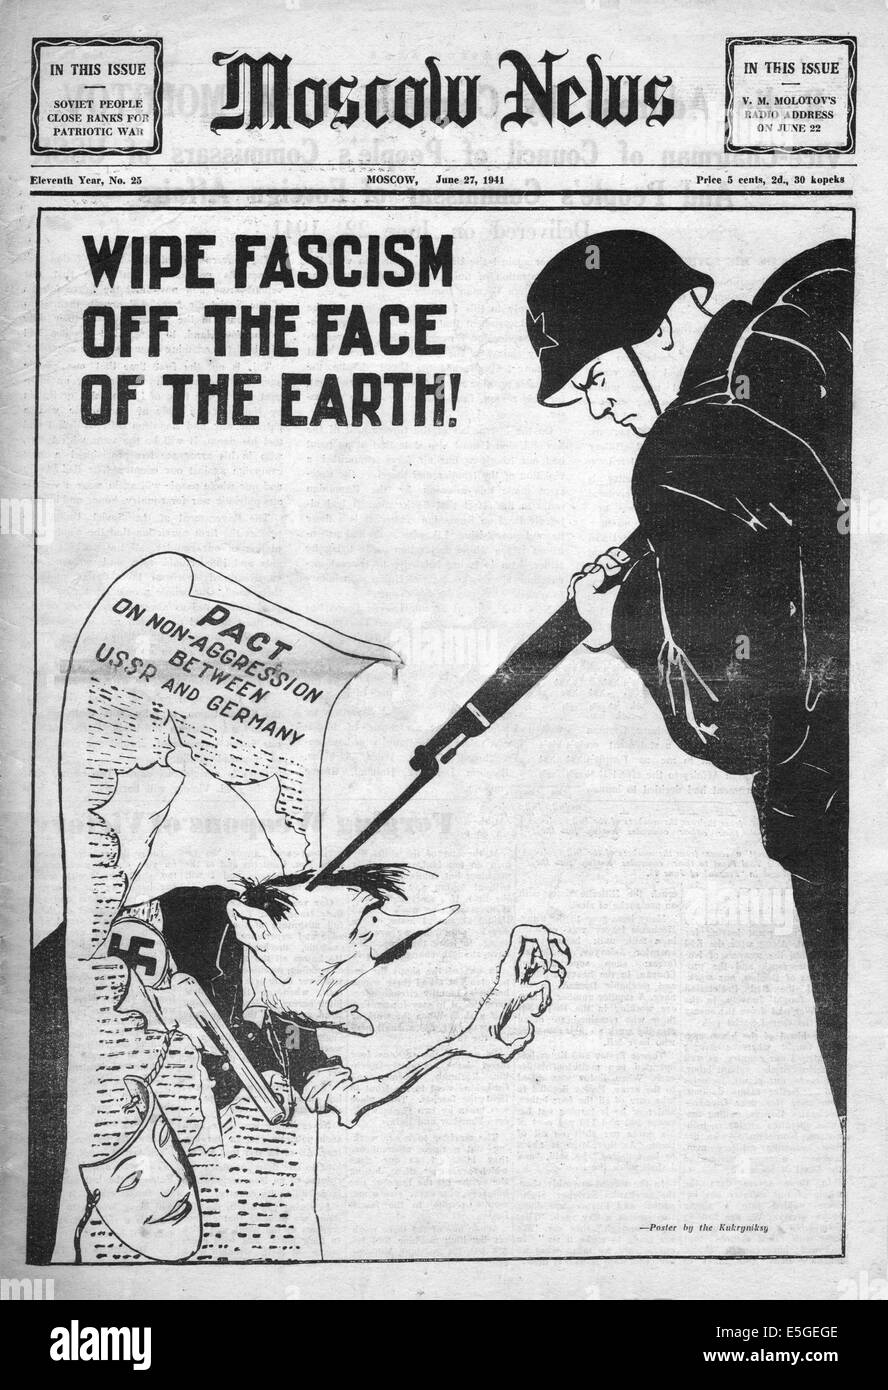 1941 Moscow News page Wipe Fascism Off The Face Of The Earth Stock Photo